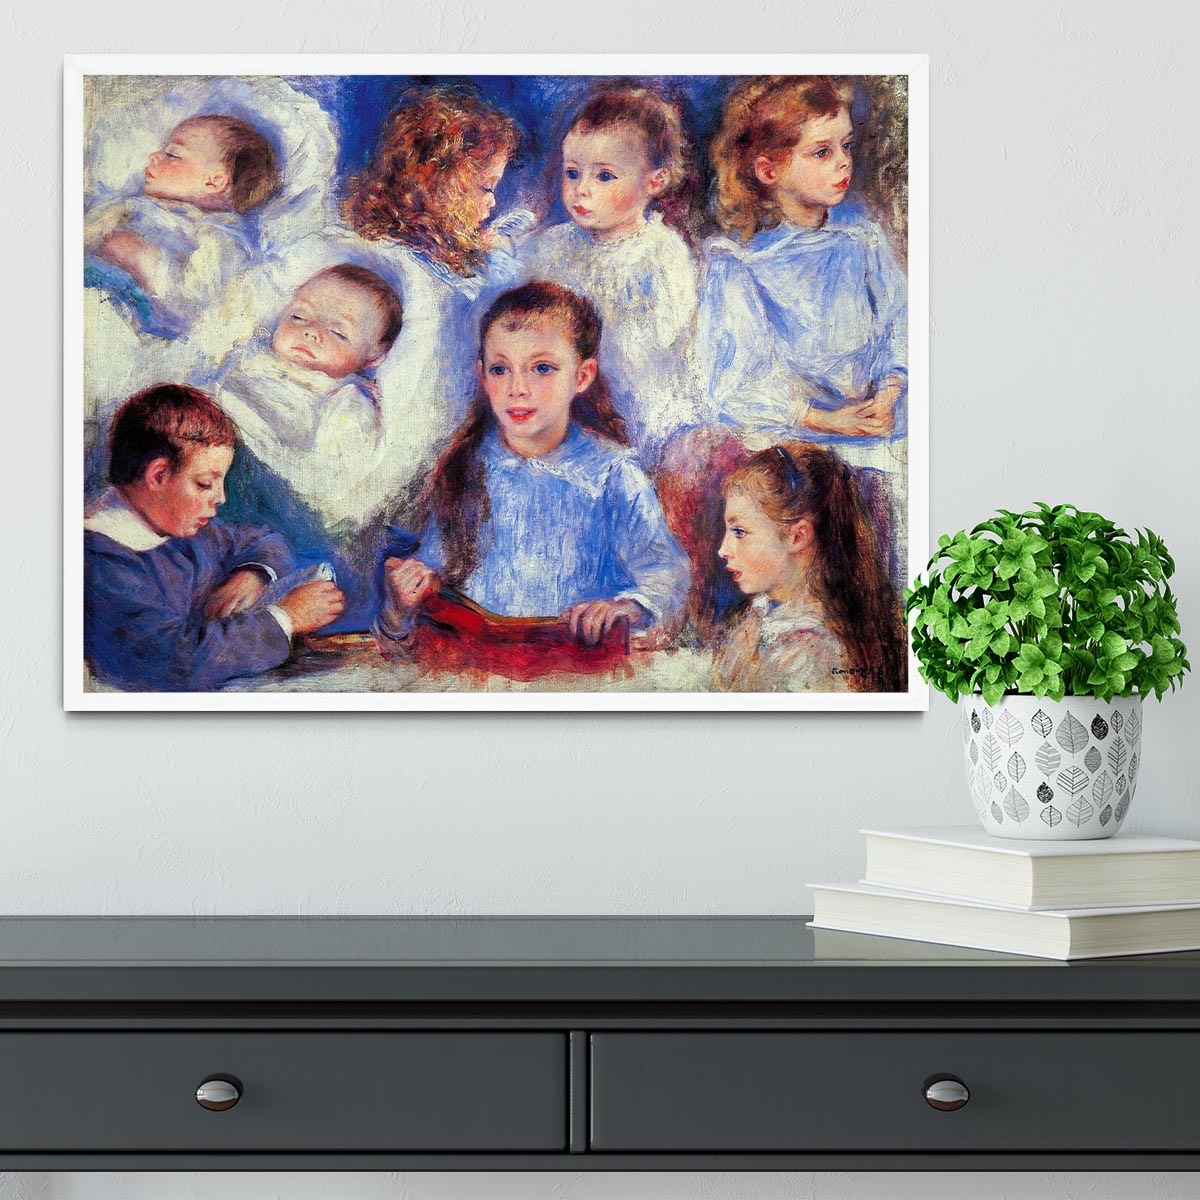 Images of childrens character heads by Renoir Framed Print - Canvas Art Rocks -6